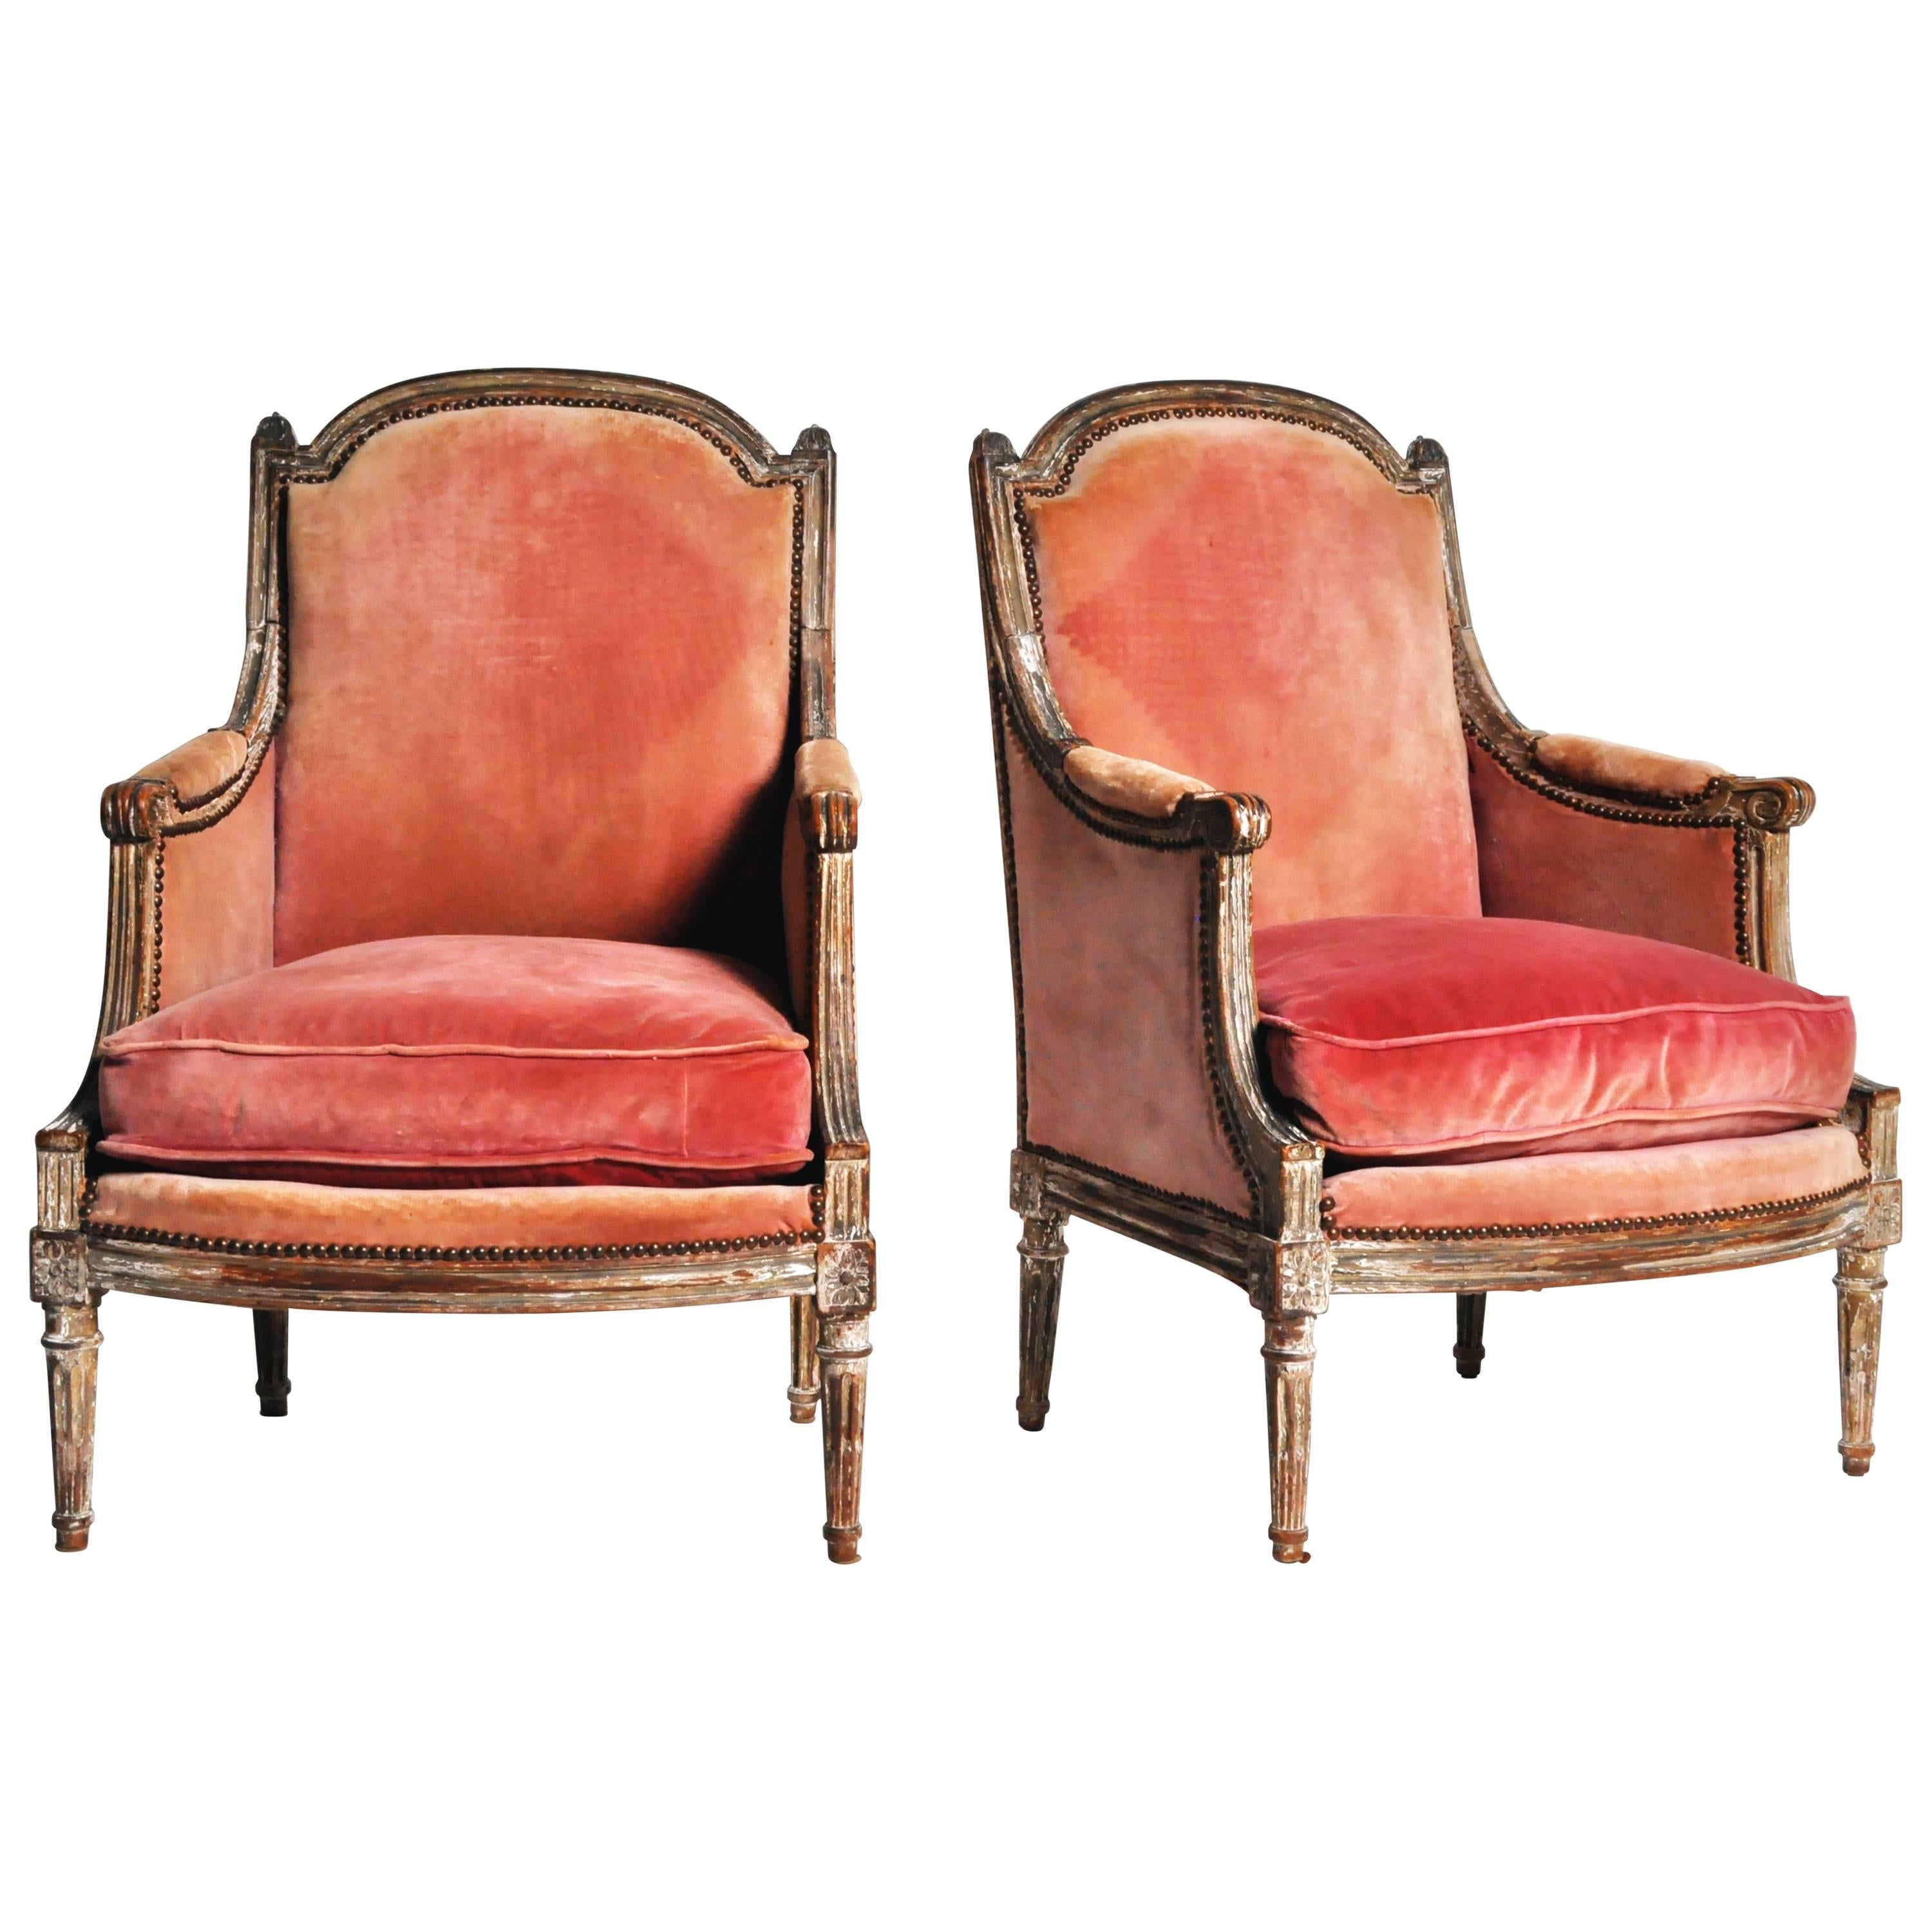 Pair of Louis XVI Style Bergere Armchairs